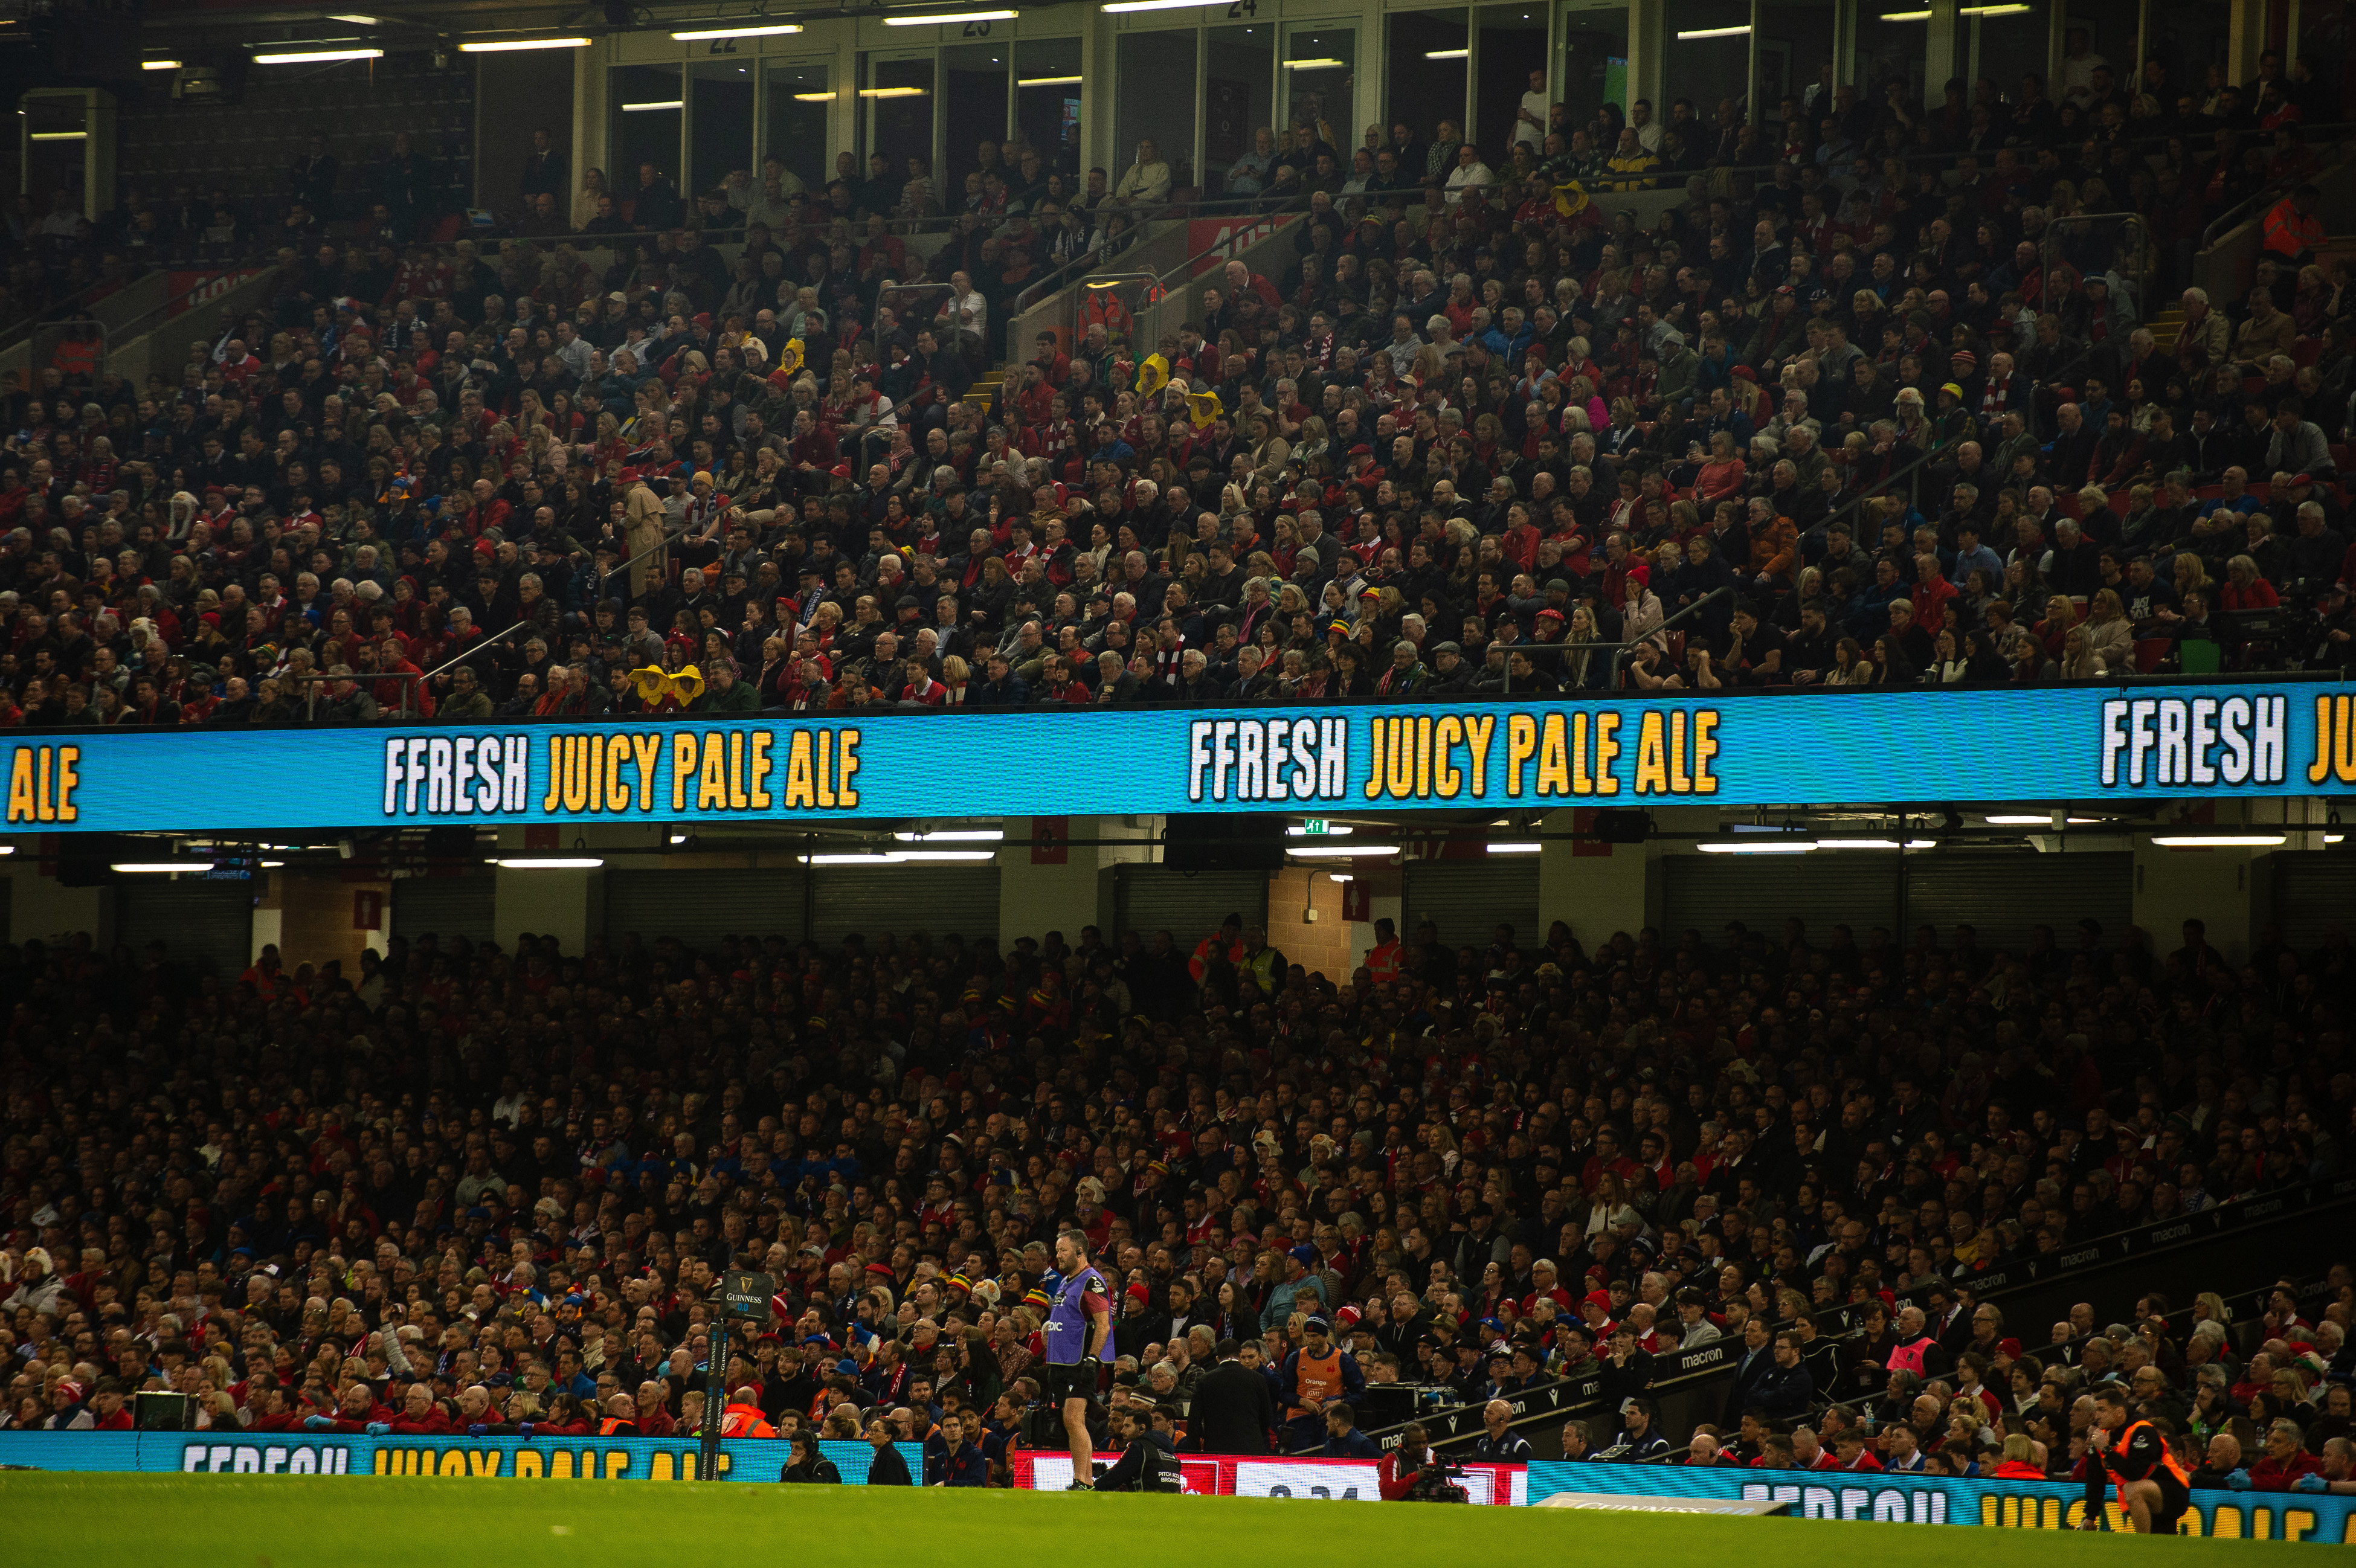 A Ffresh Start - The New Official Ale of the WRU